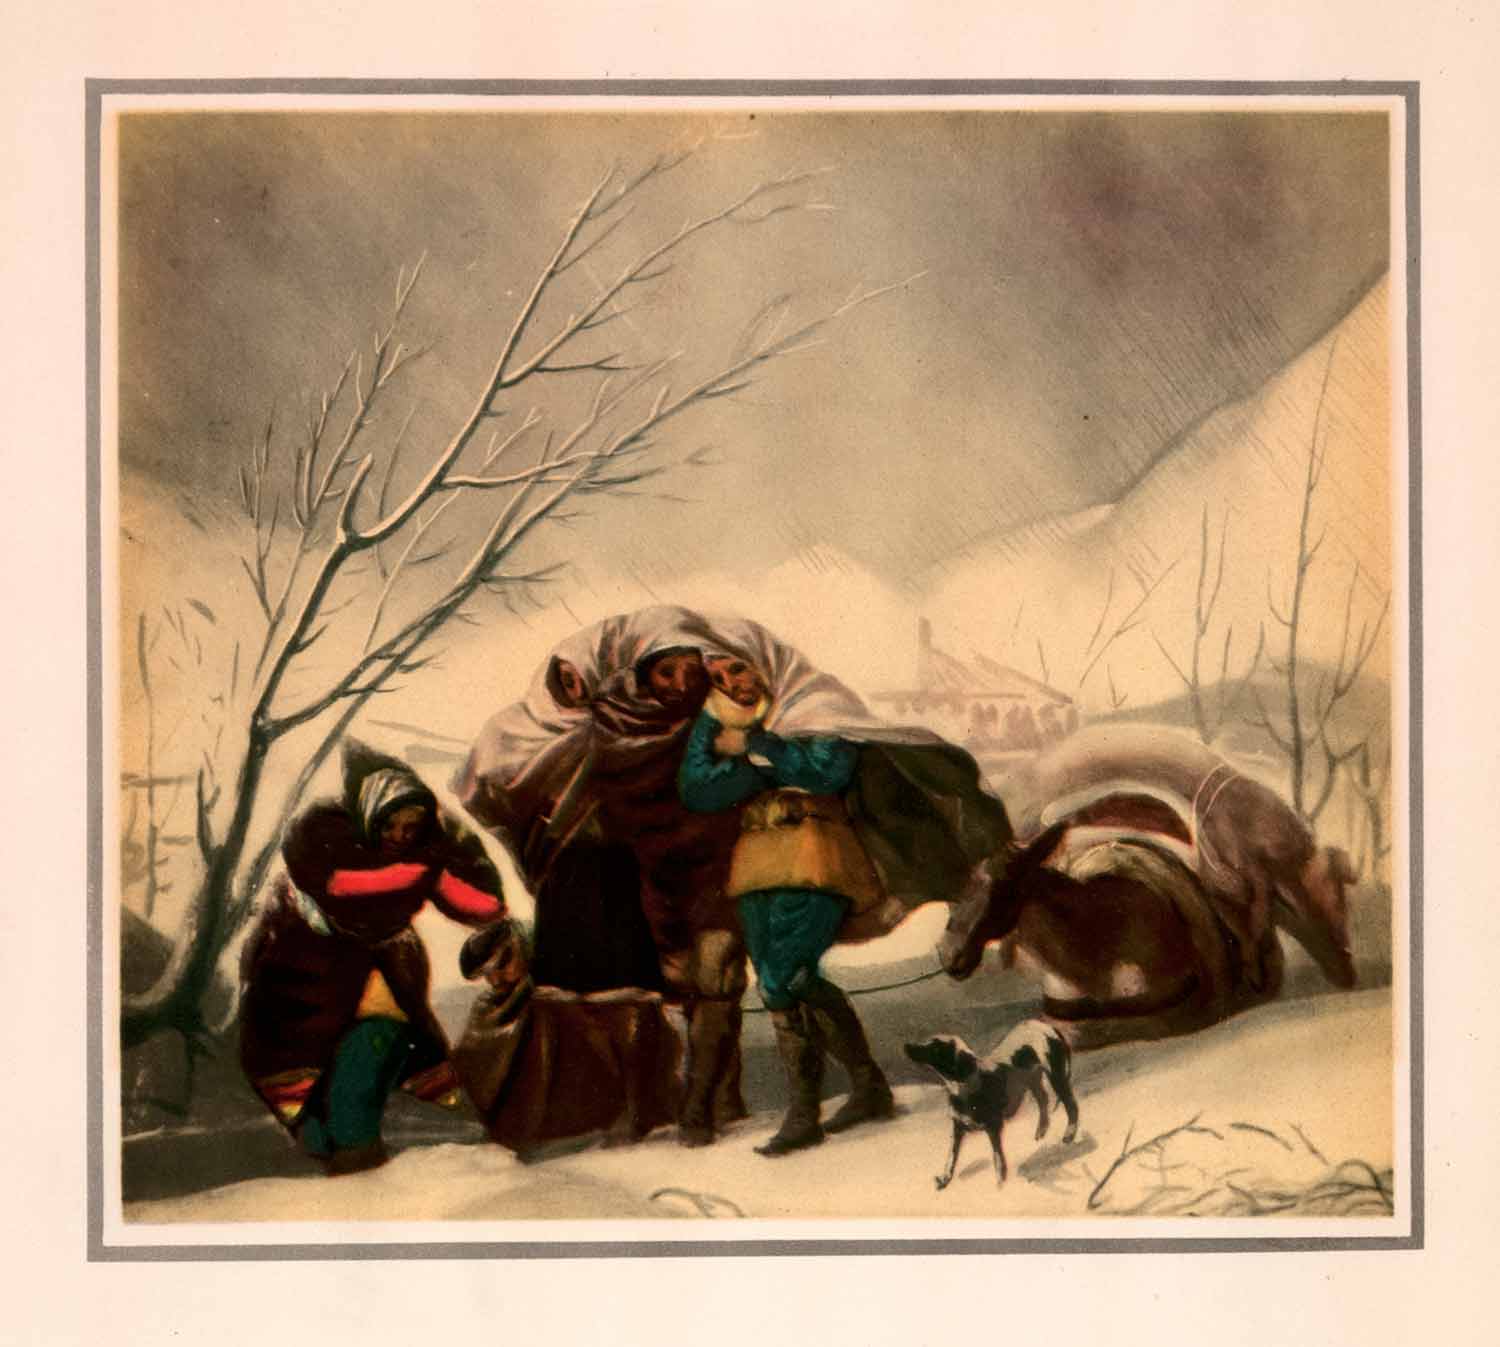 1941 Photolithograph Winter Francisco Goya Snowstorm Painting Lithograph XAO2